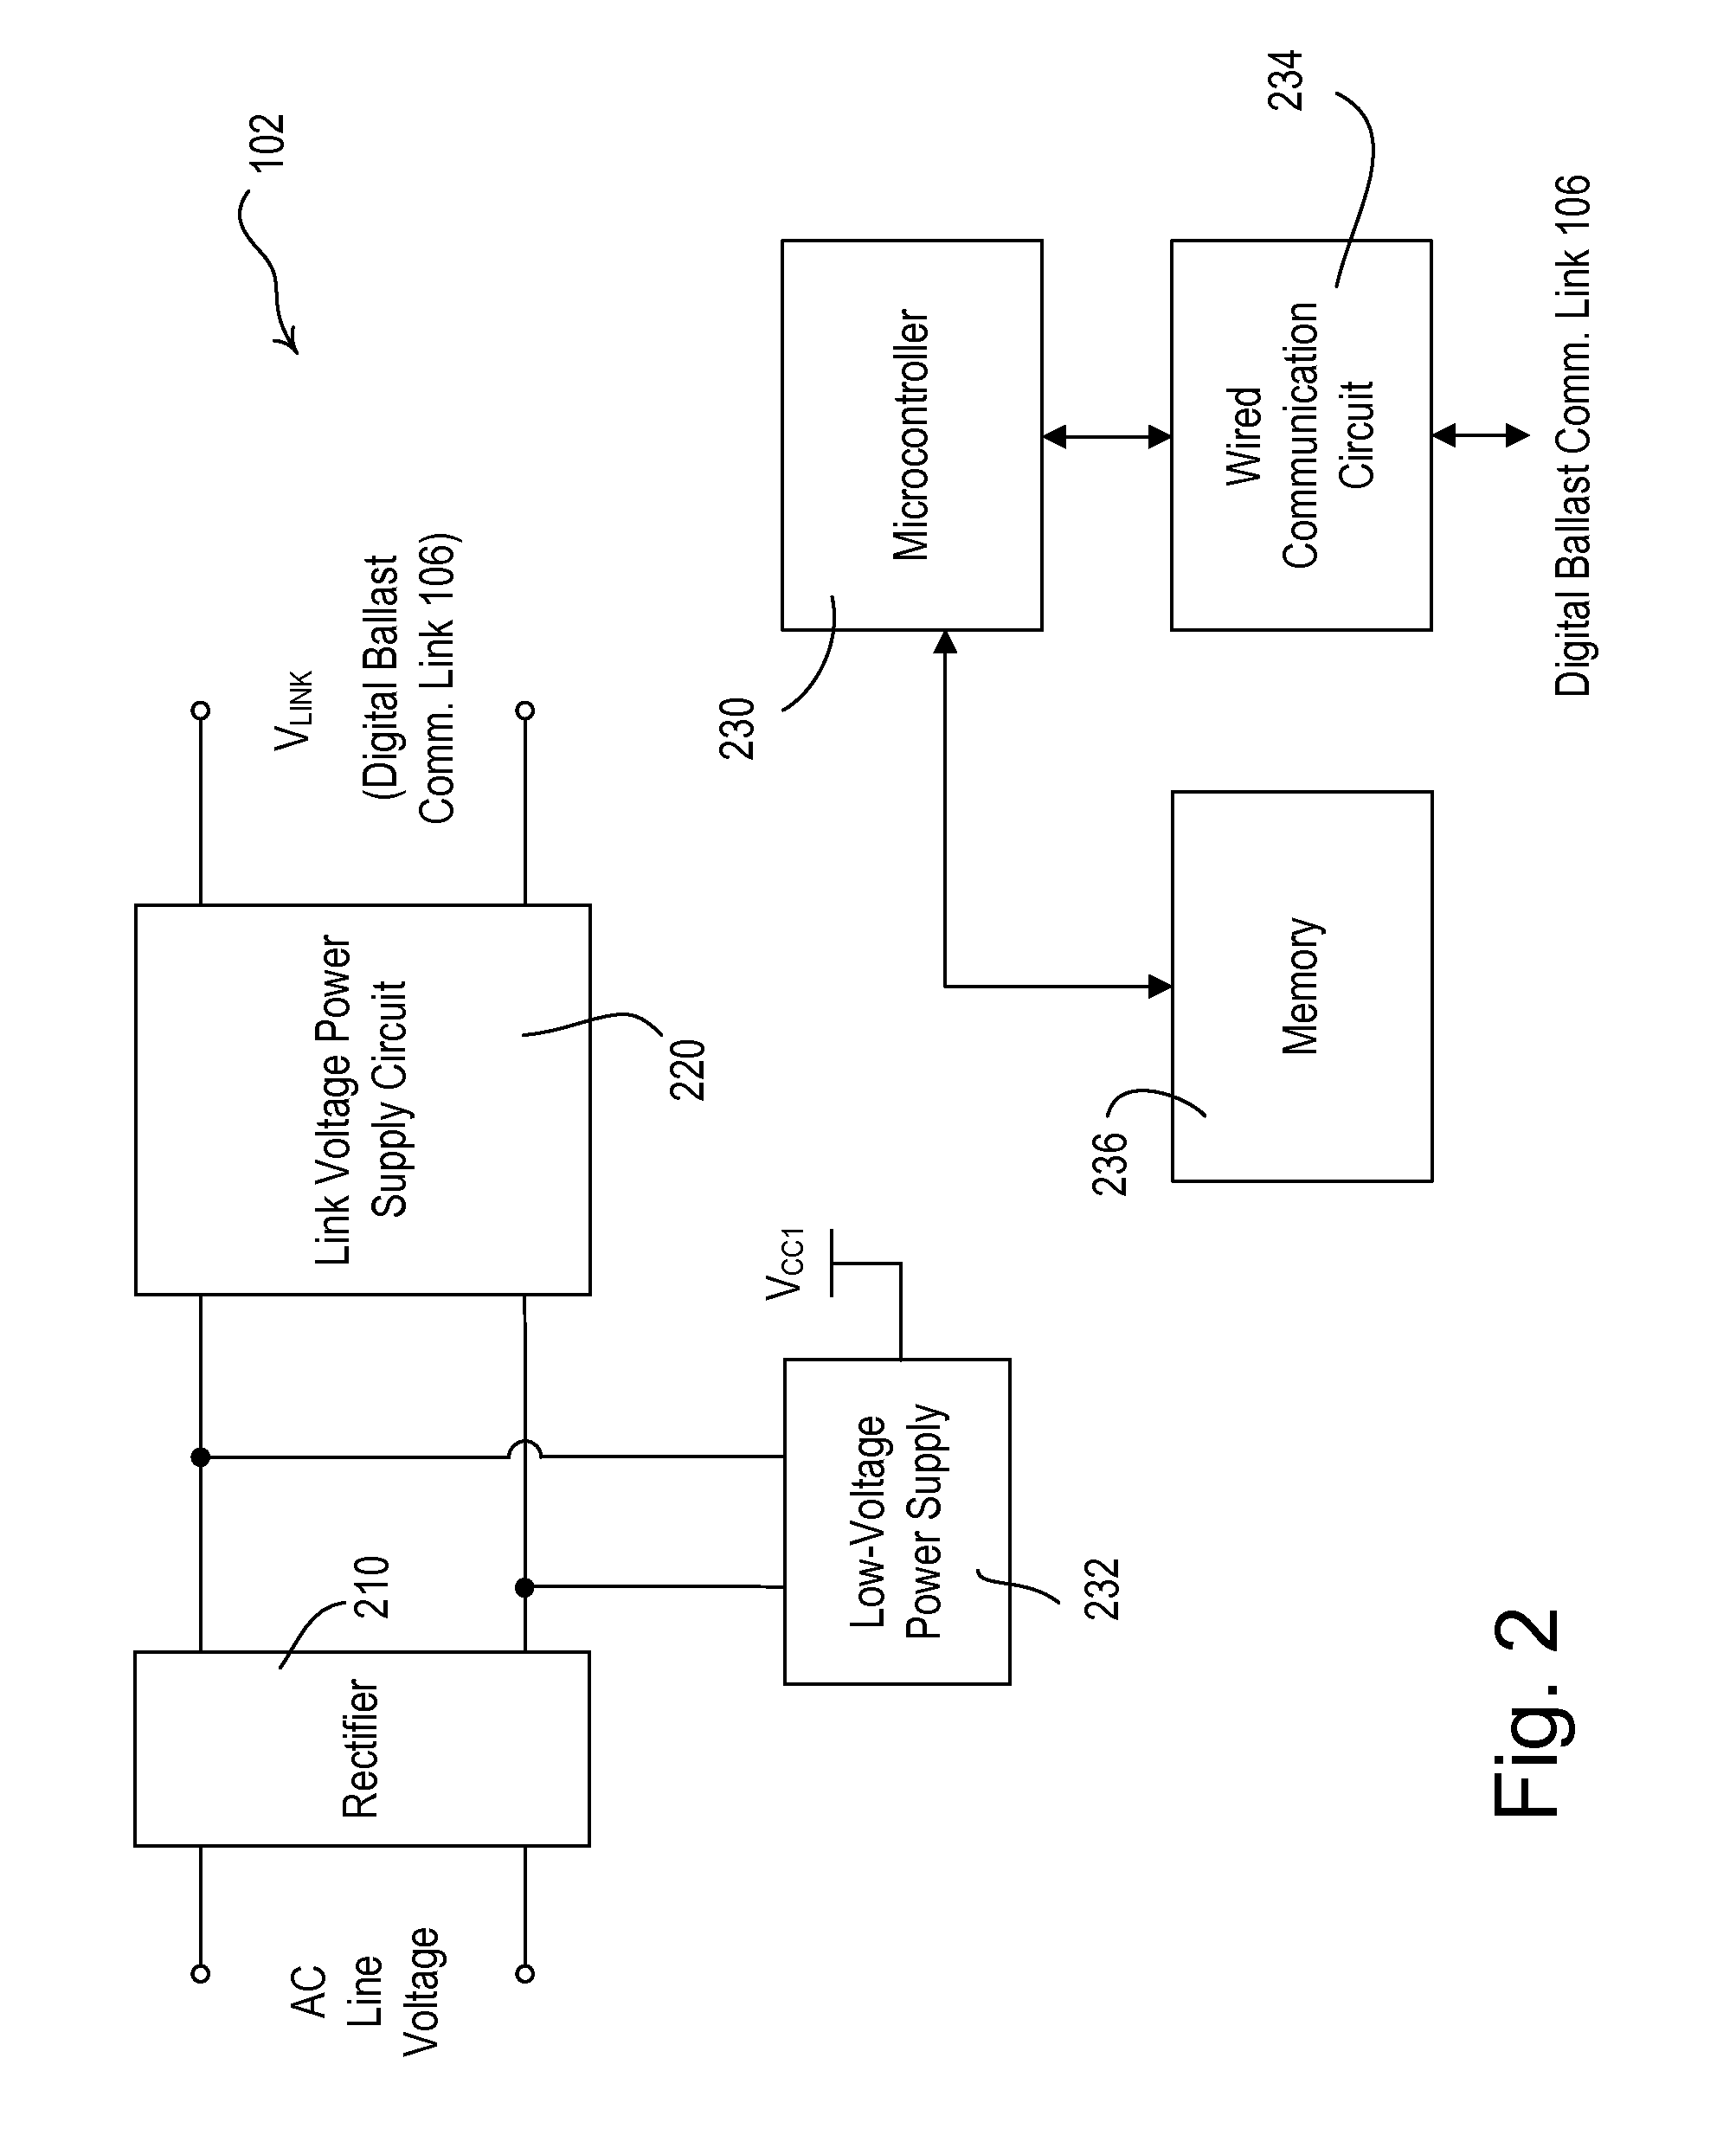 Method of Automatically Programming a Load Control Device Using a Remote Identification Tag